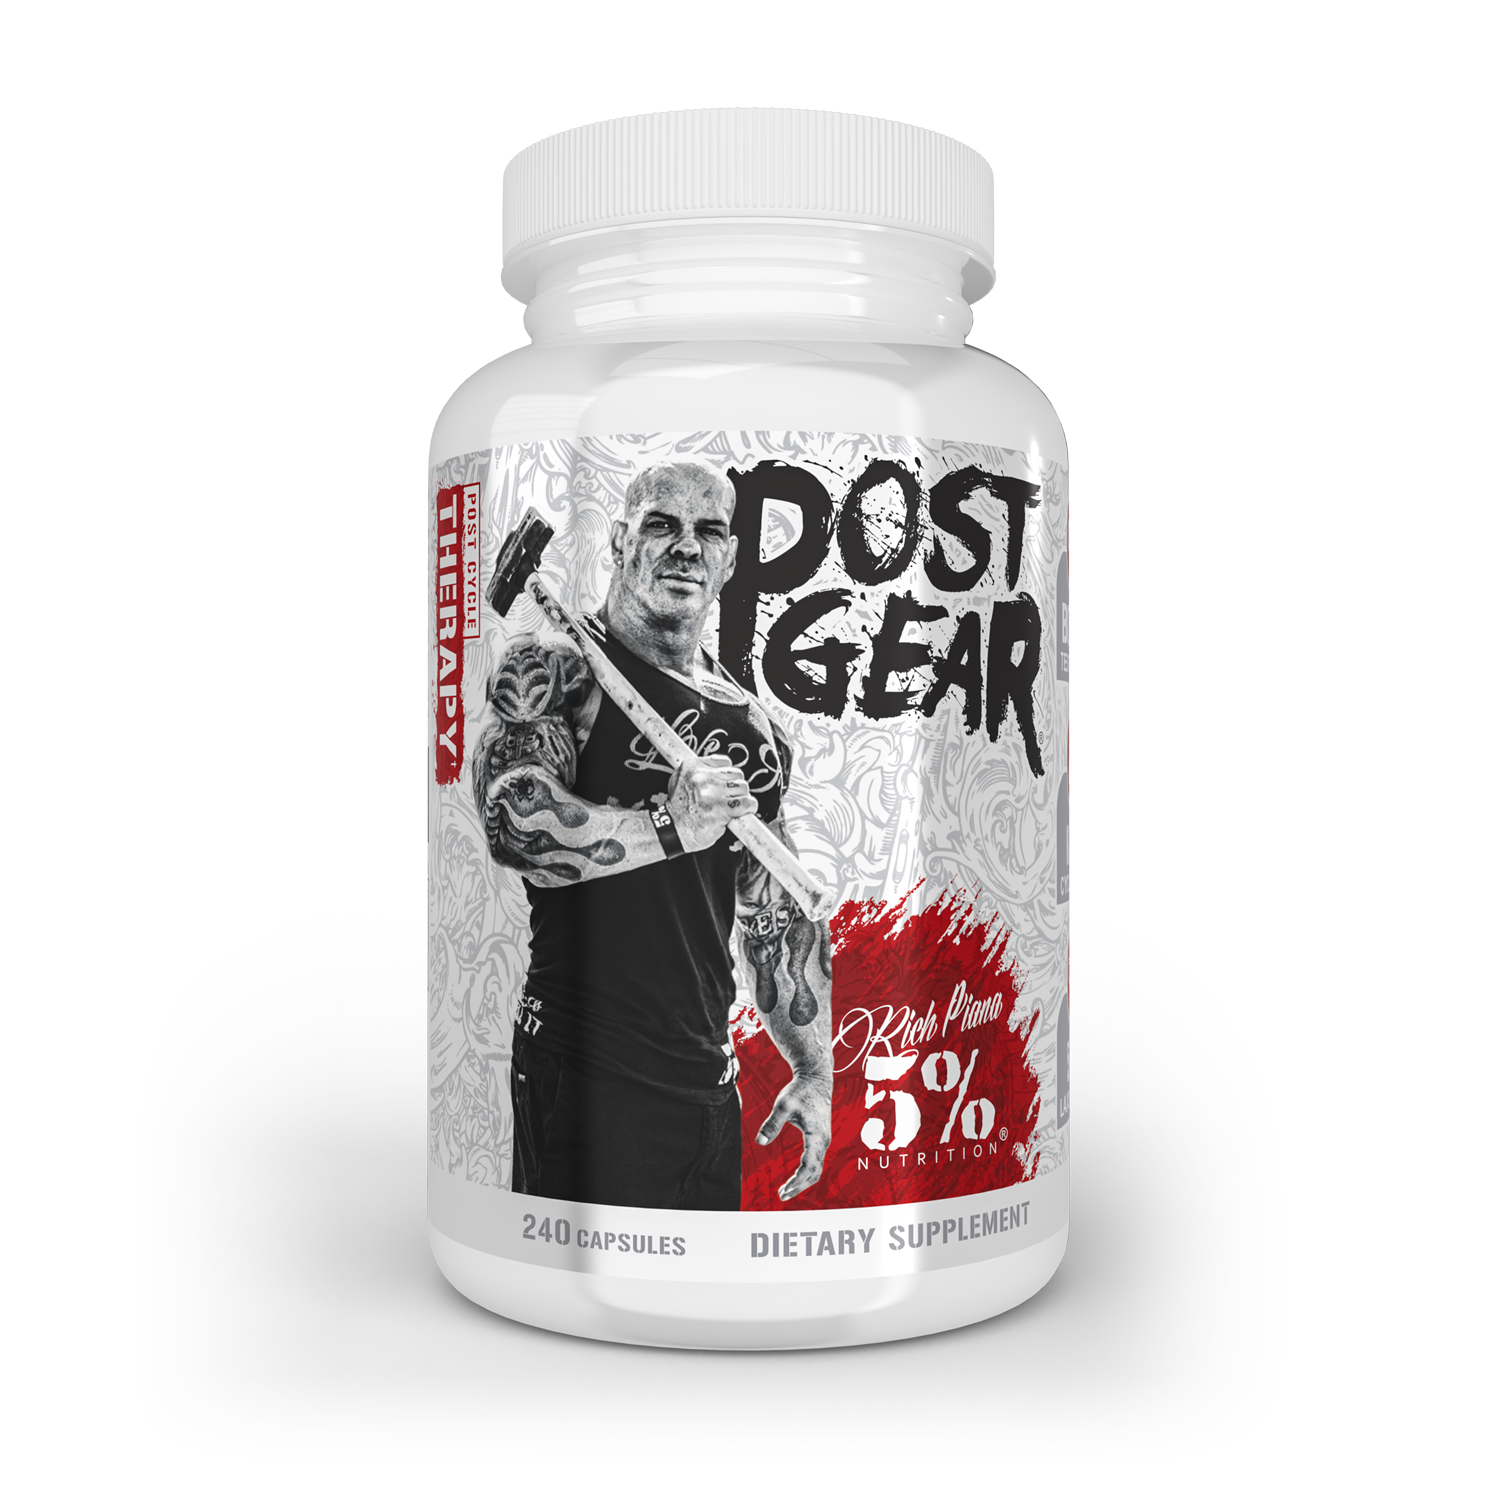 5% Nutrition Post Gear PCT Support Legendary Series